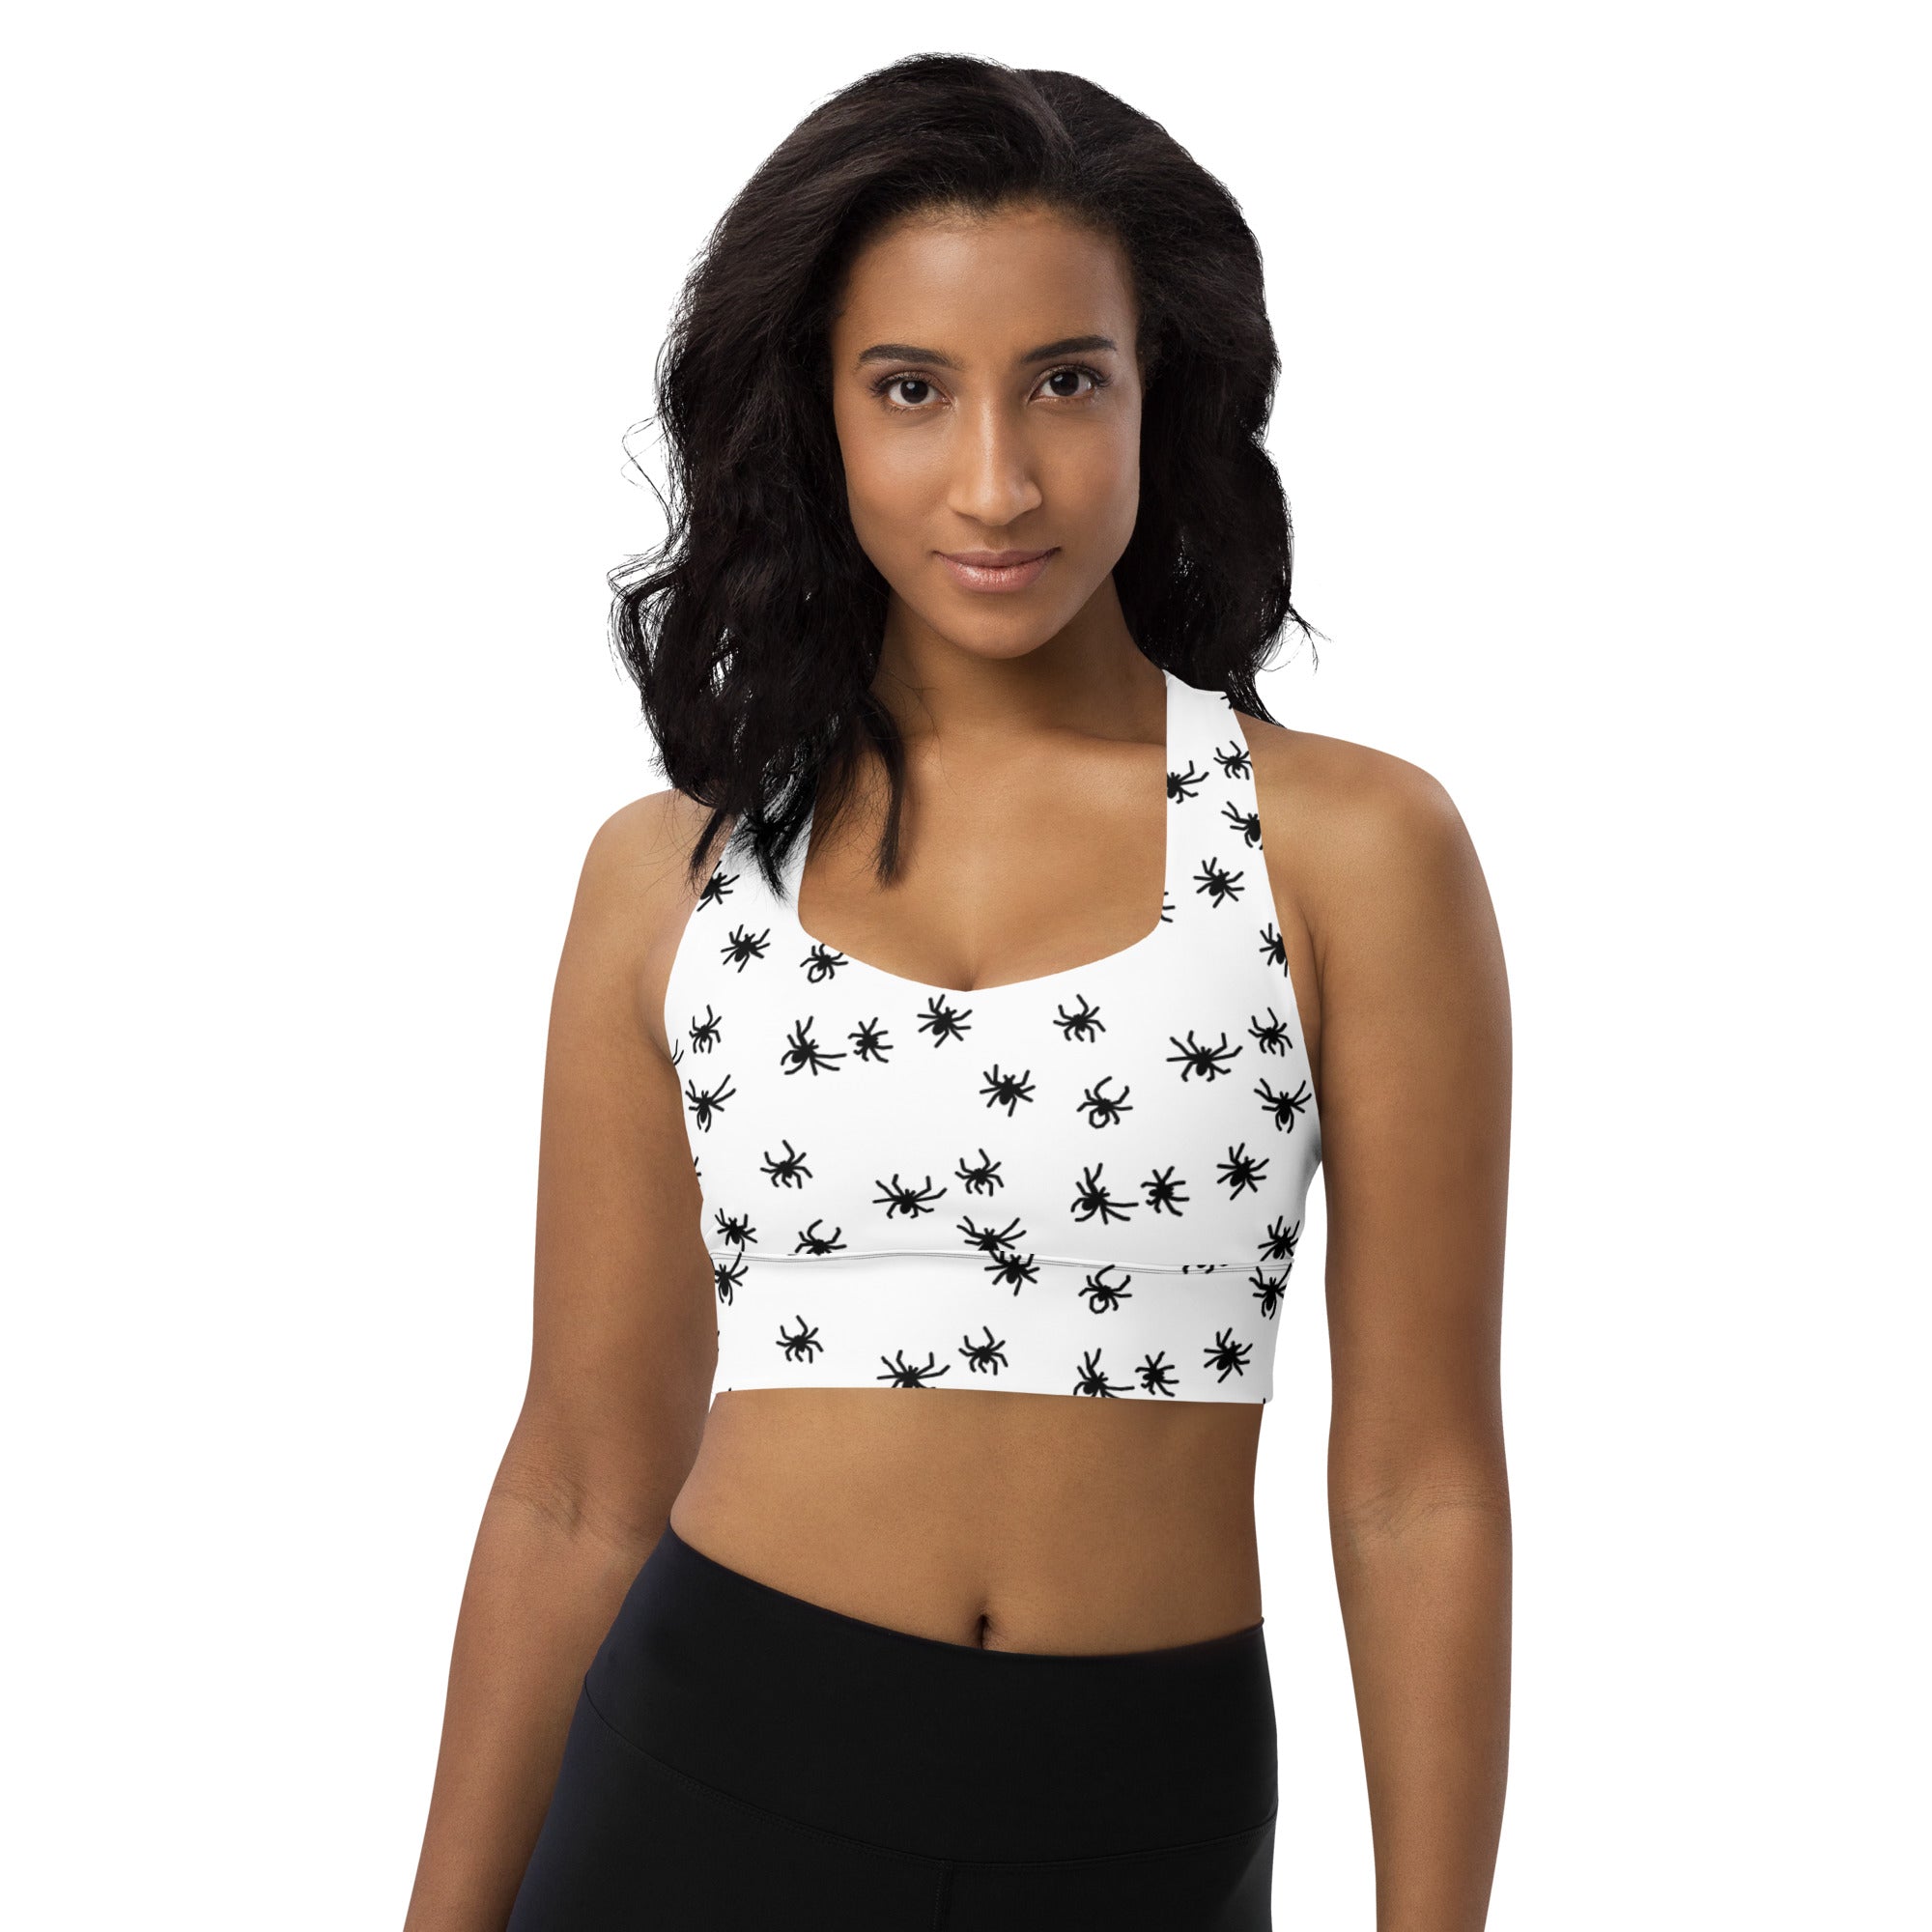 OPV - Running from Spiders / Yoga in a Web?  Longline sports bra